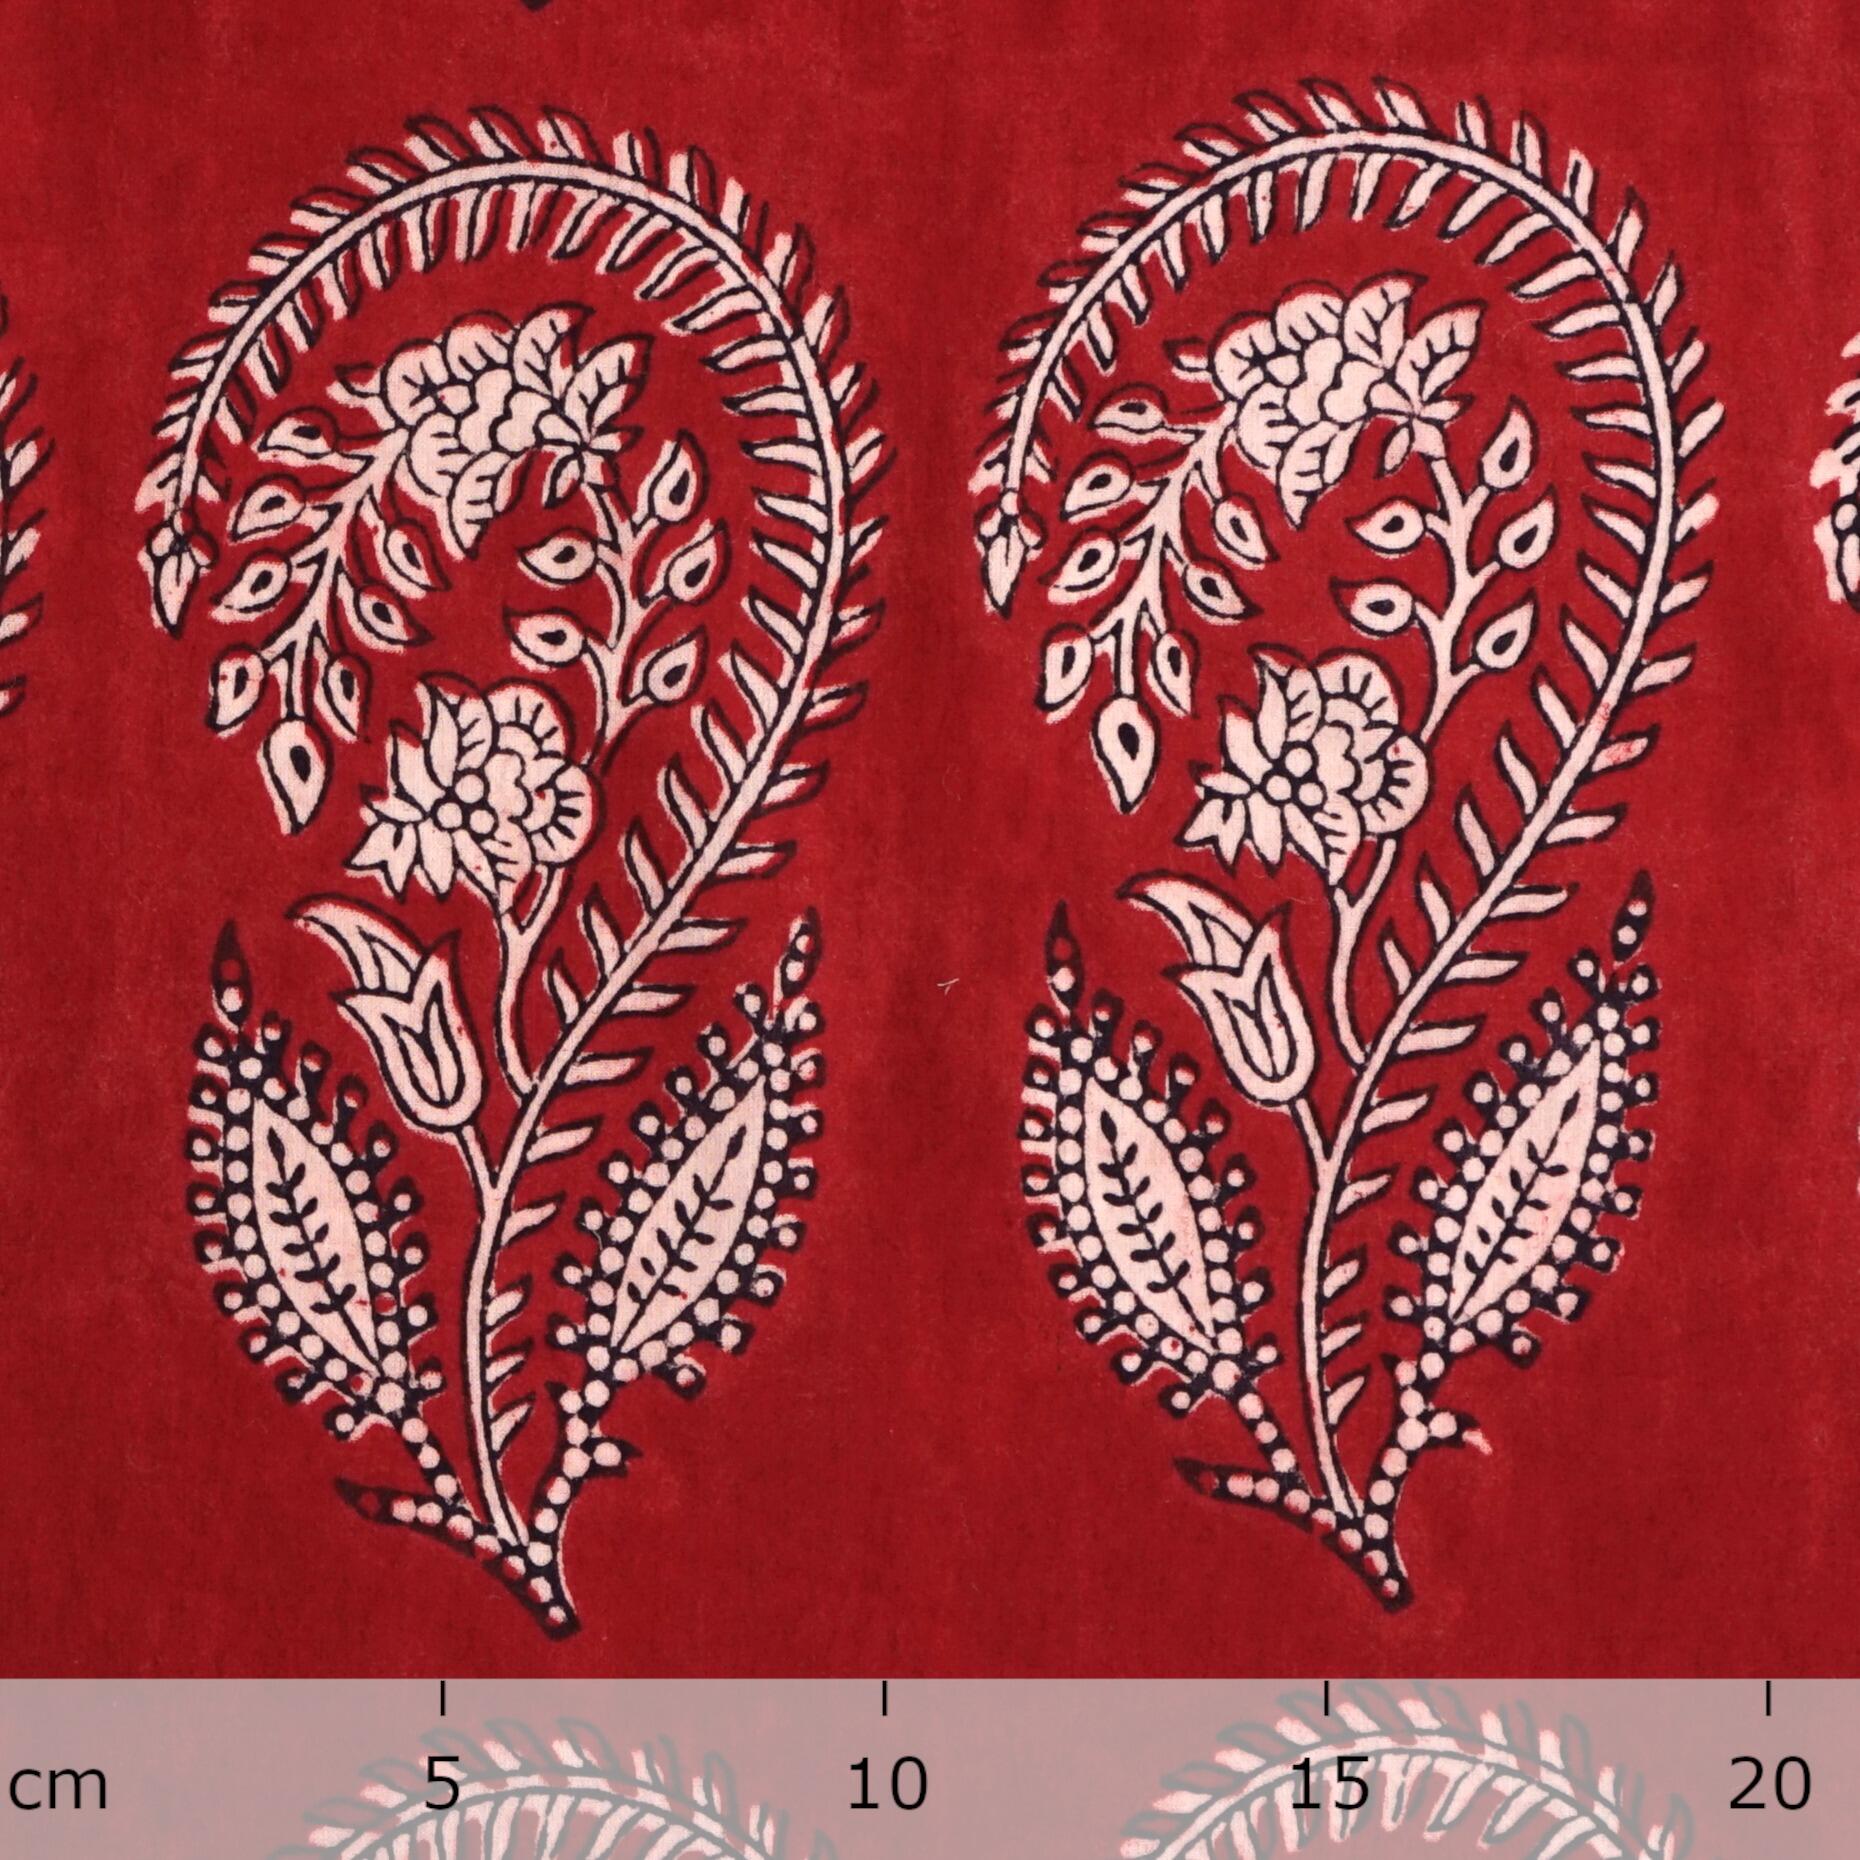 100% Block - Printed Cotton Fabric From India - Scorpion Design - Iron Rust Black & Alizarin Red Dyes - Ruler